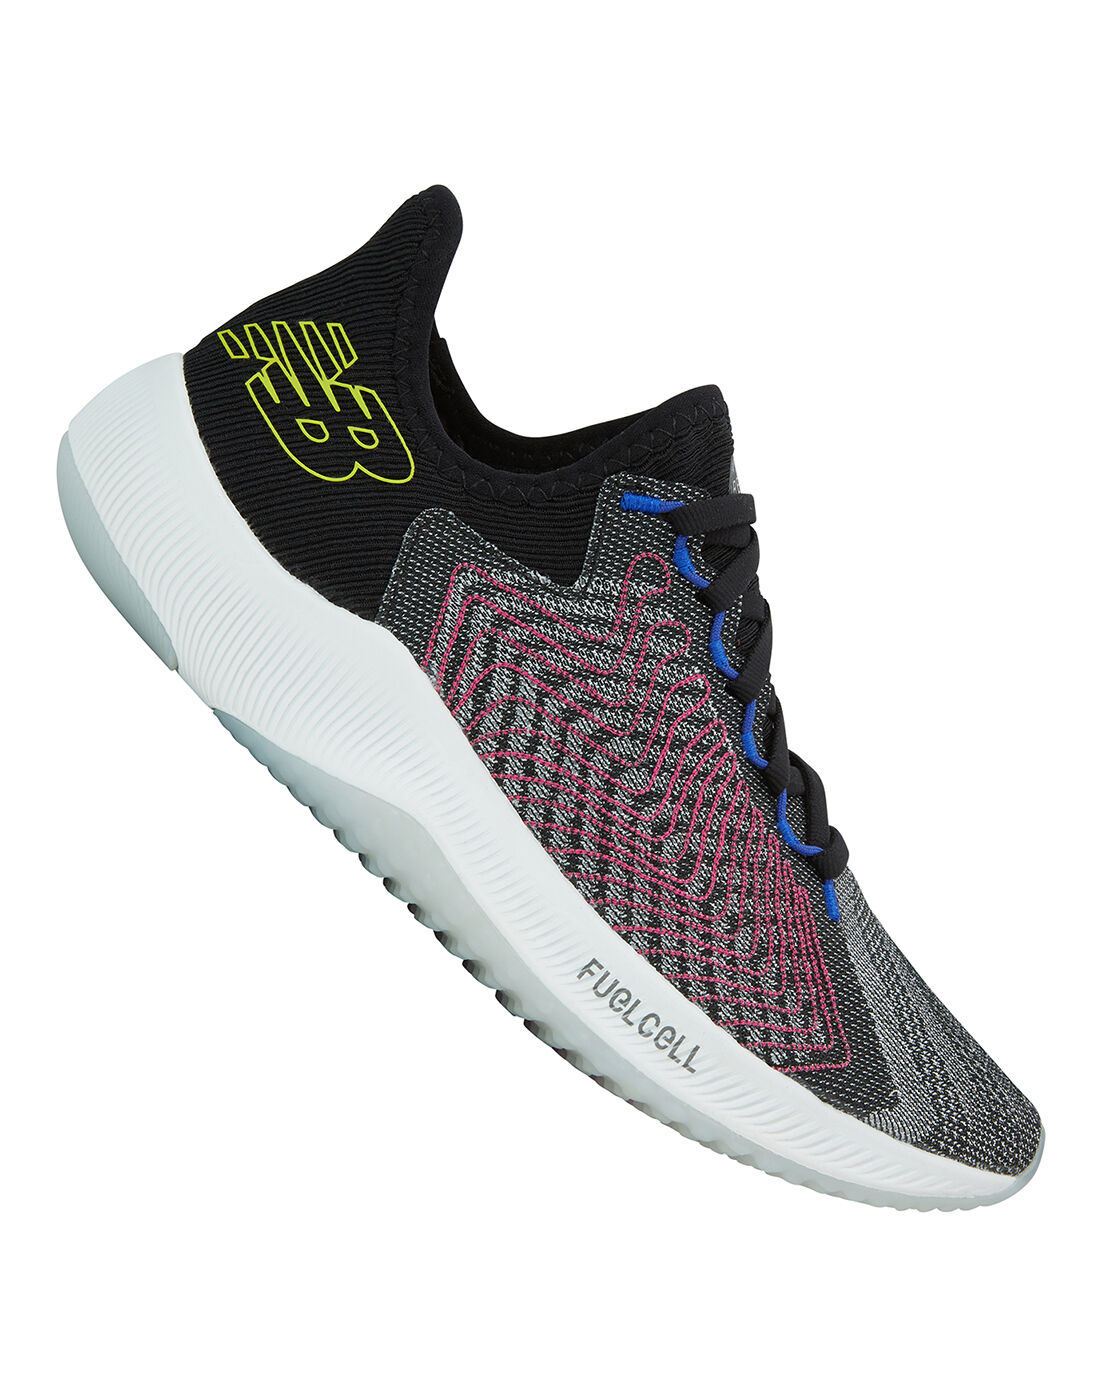 New Balance Womens Fuel Cell Rebel 